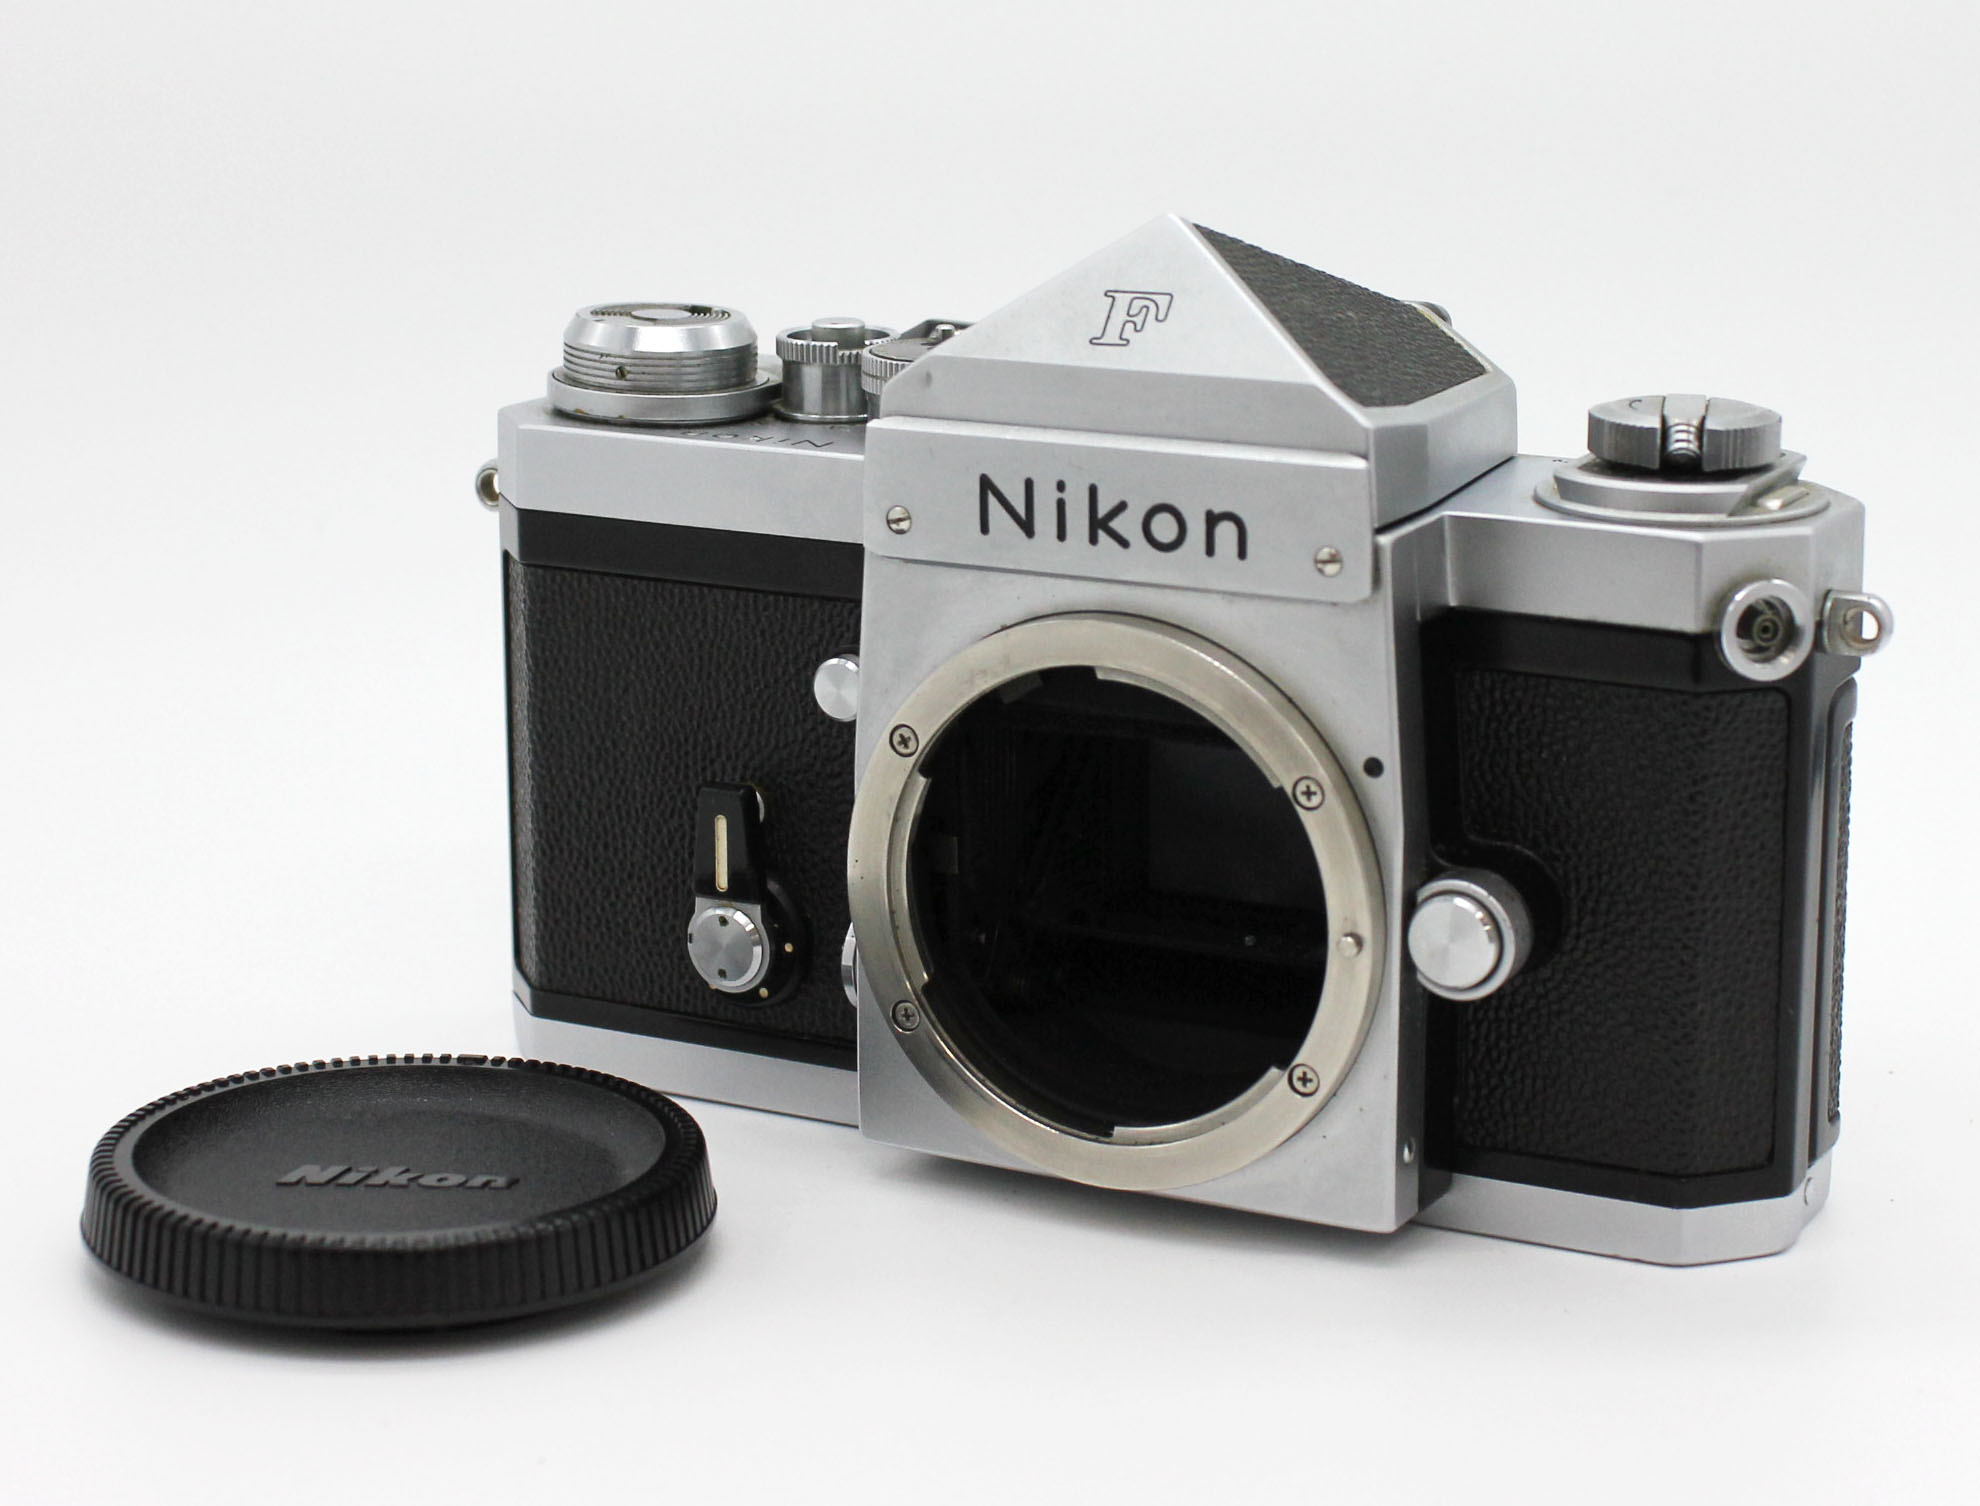 Japan Used Camera Shop | [Excellent+++] Nikon Apollo New F Eye Level 35mm SLR Film Camera S/N 742* from Japan